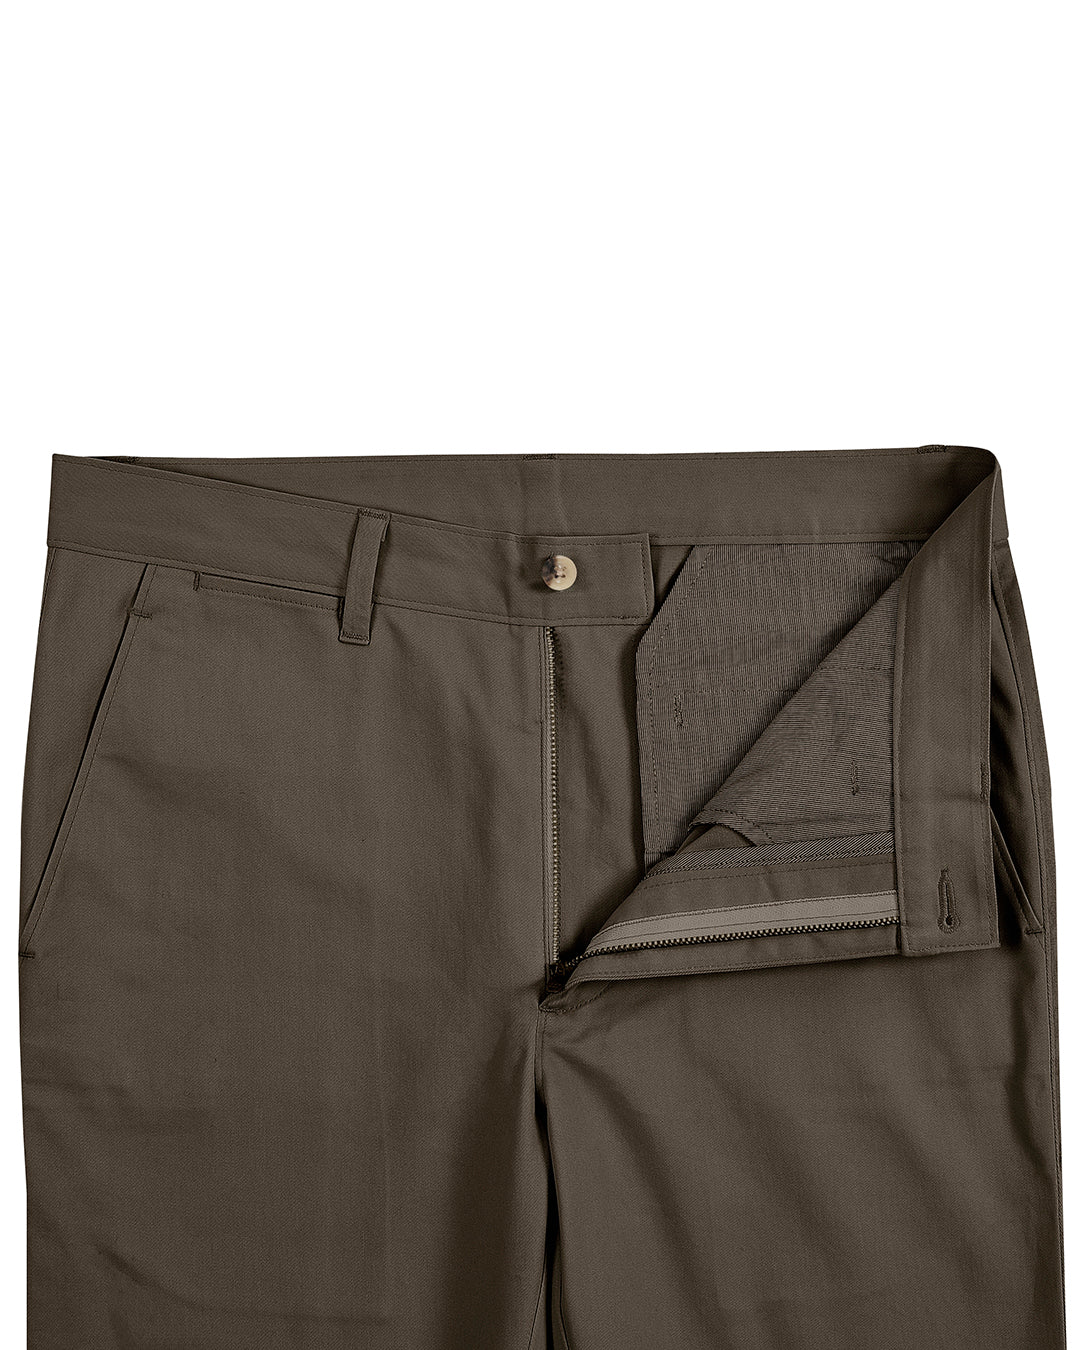 Front view of custom Genoa Chino pants for men by Luxire in khaki brown